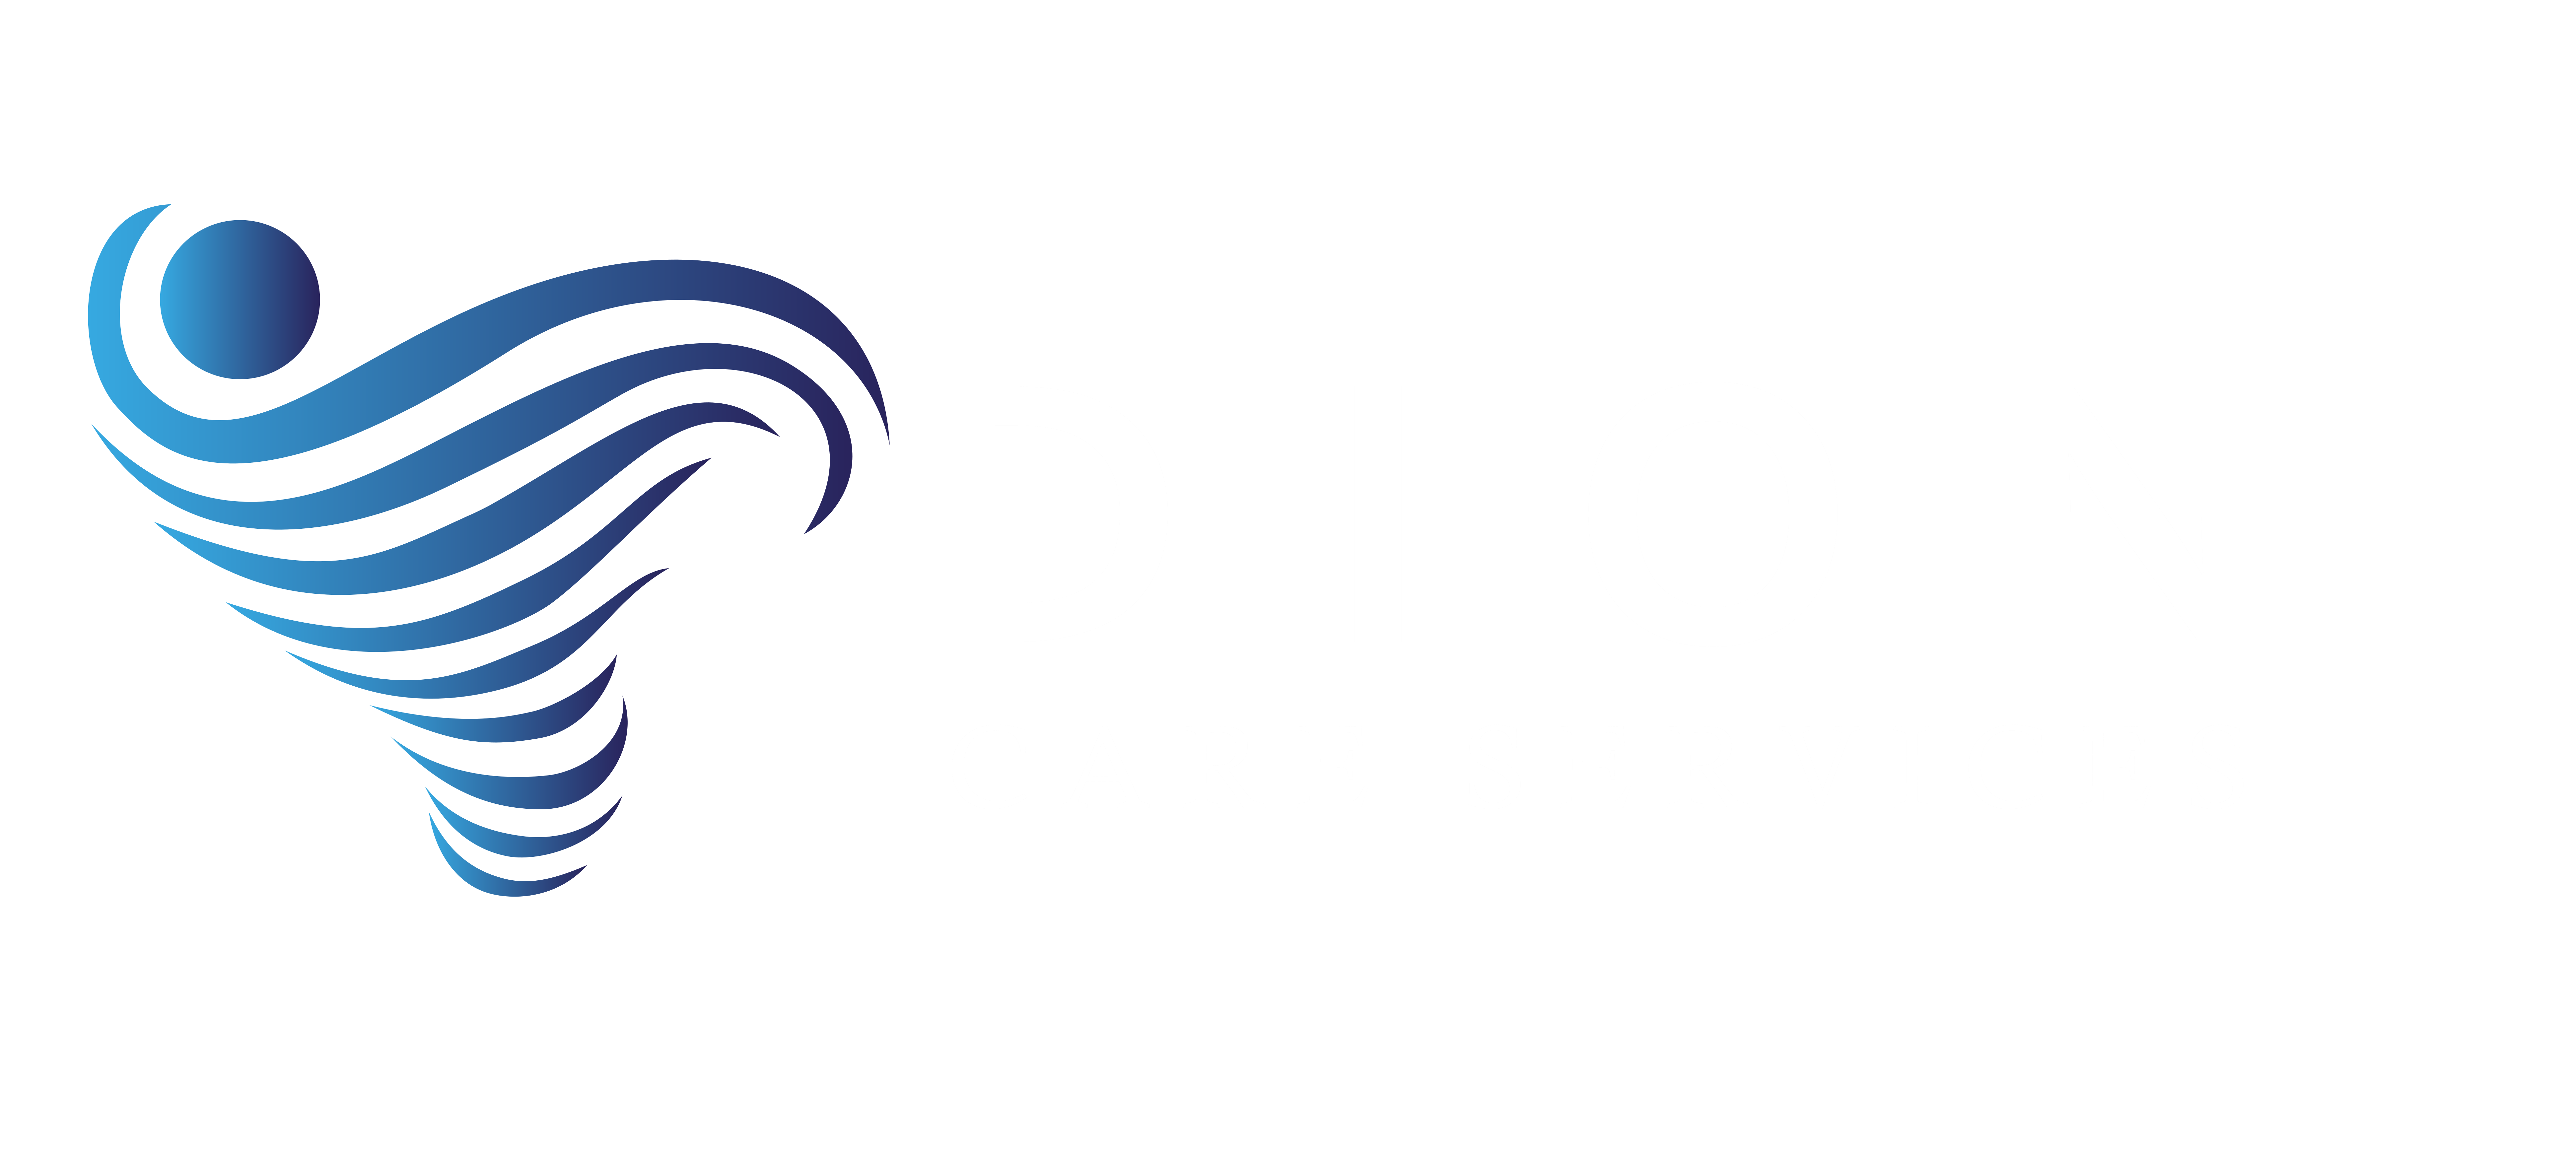 Dion Care Services